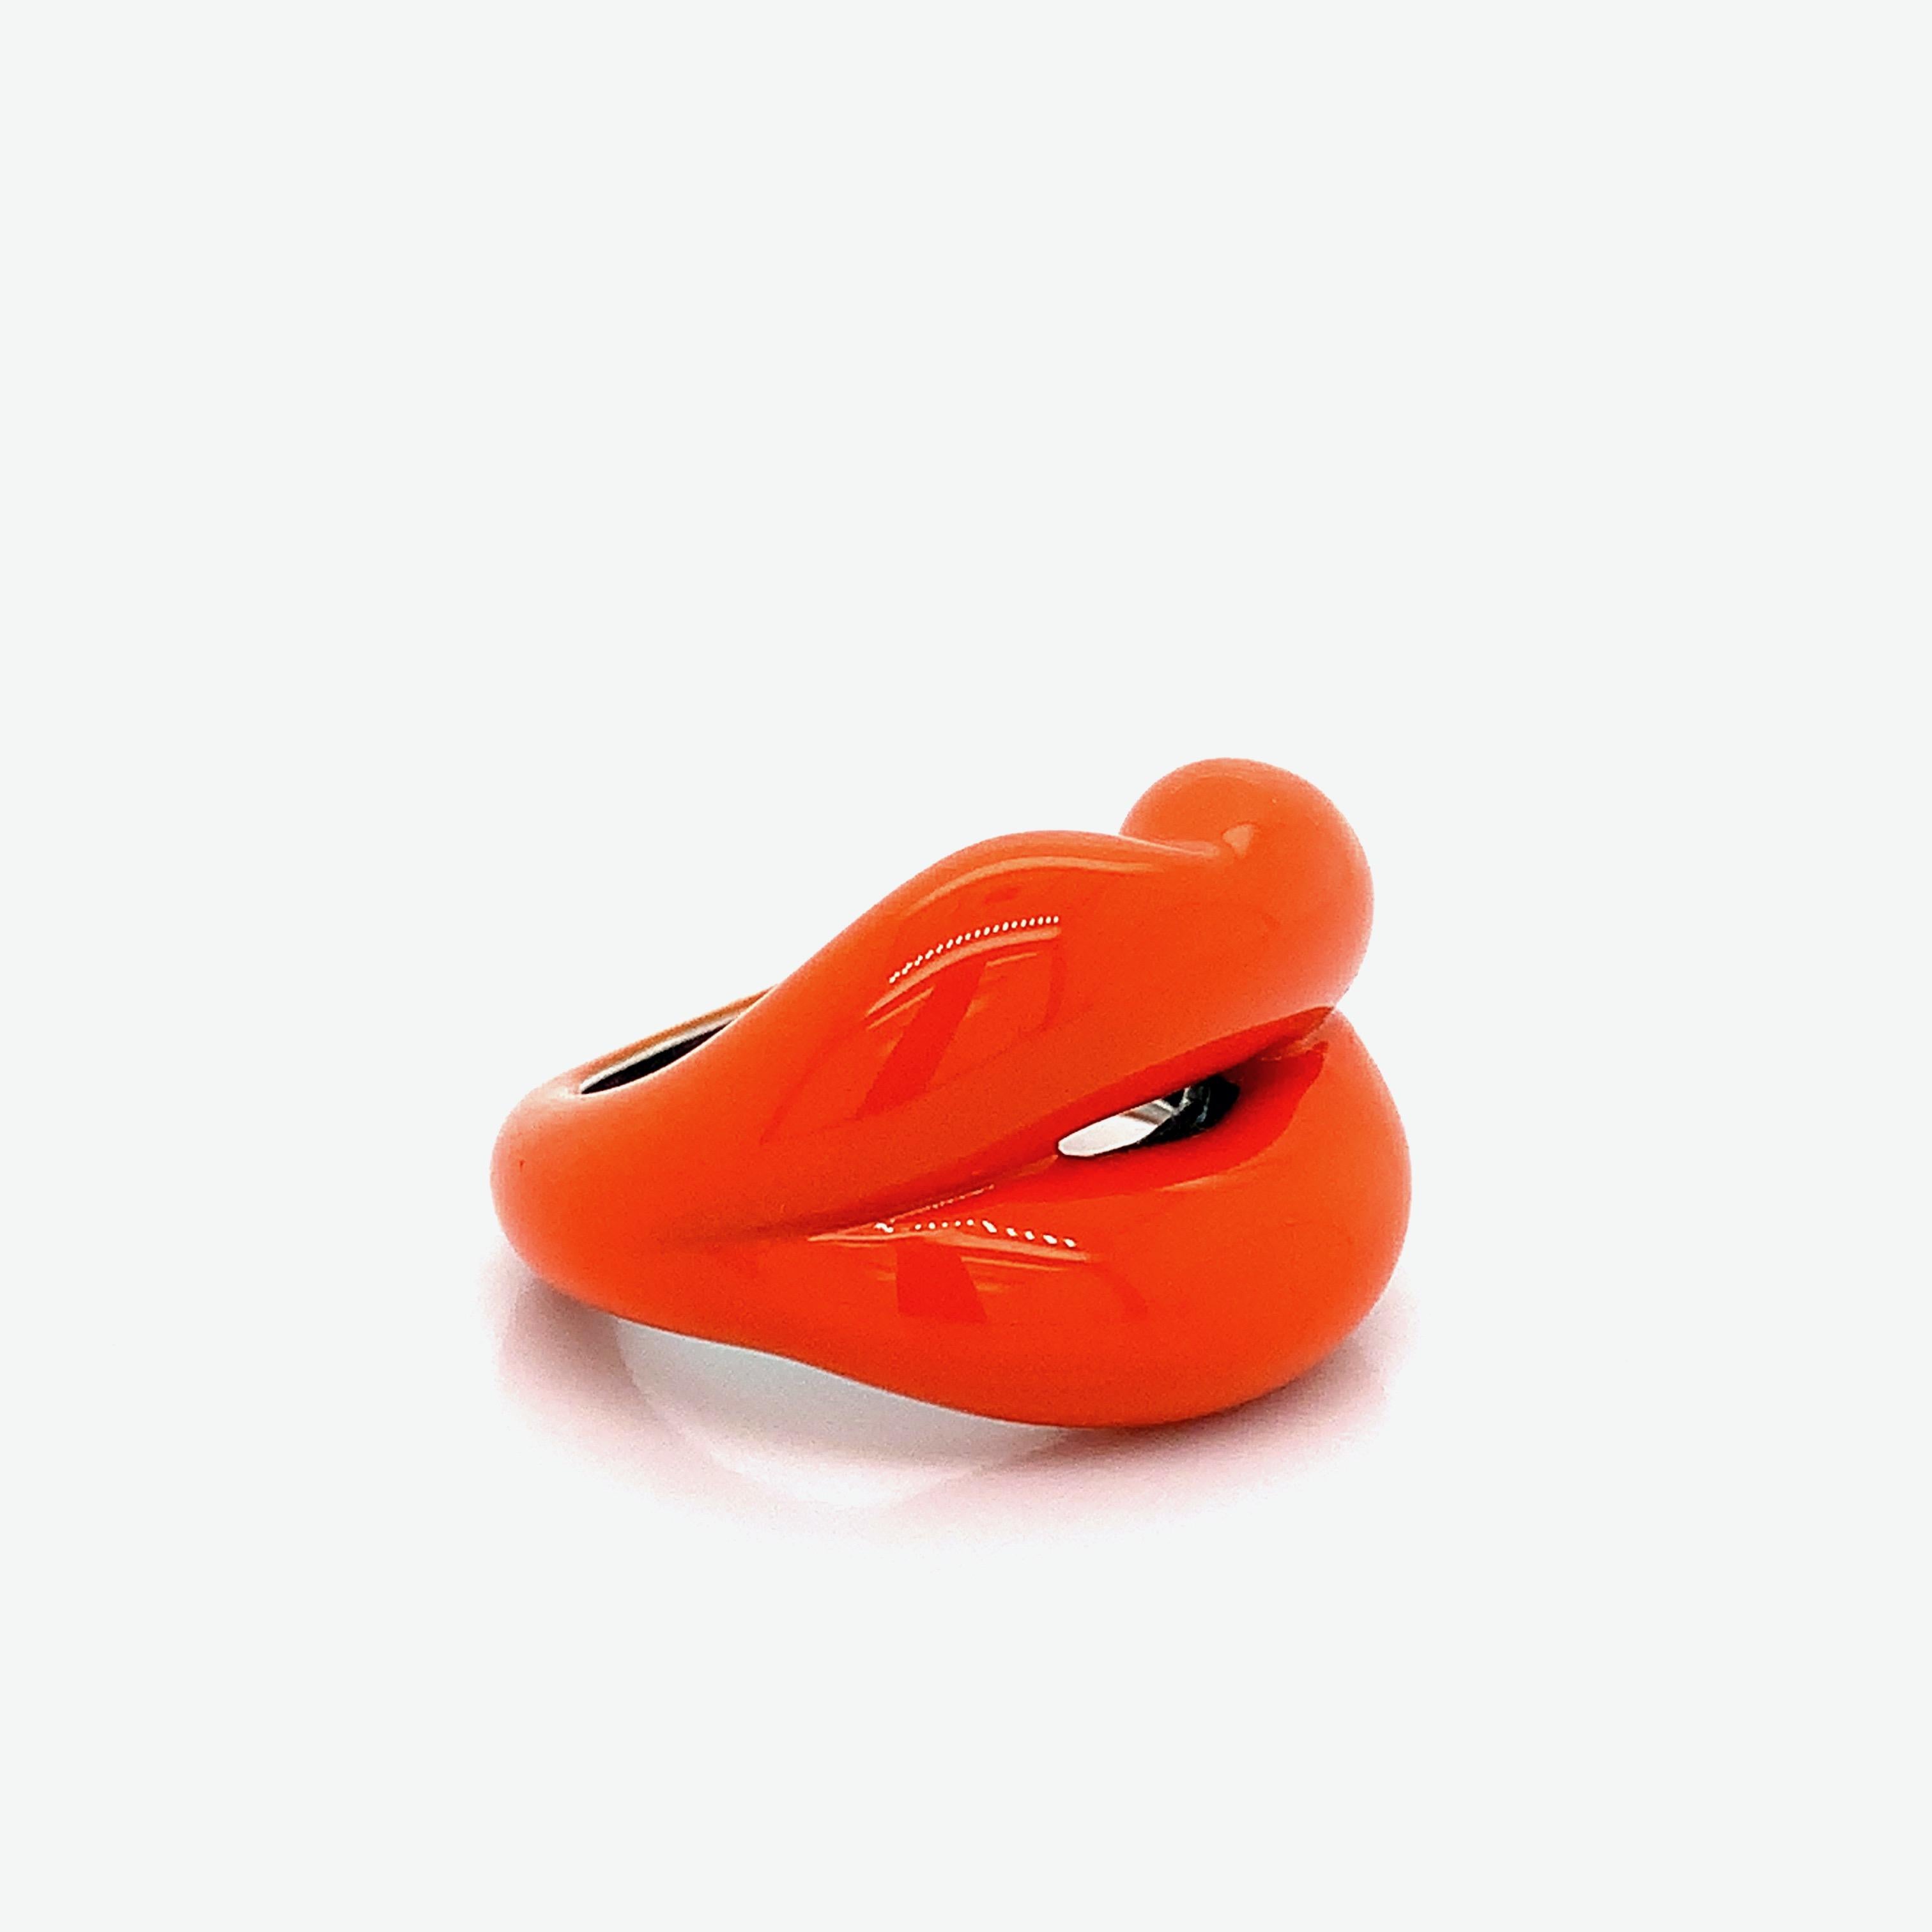 A silver ring created by Solange Azagury-Partridge with a bright orange enamel lips design. Size 5.5. Total weight: 12.0 grams. 